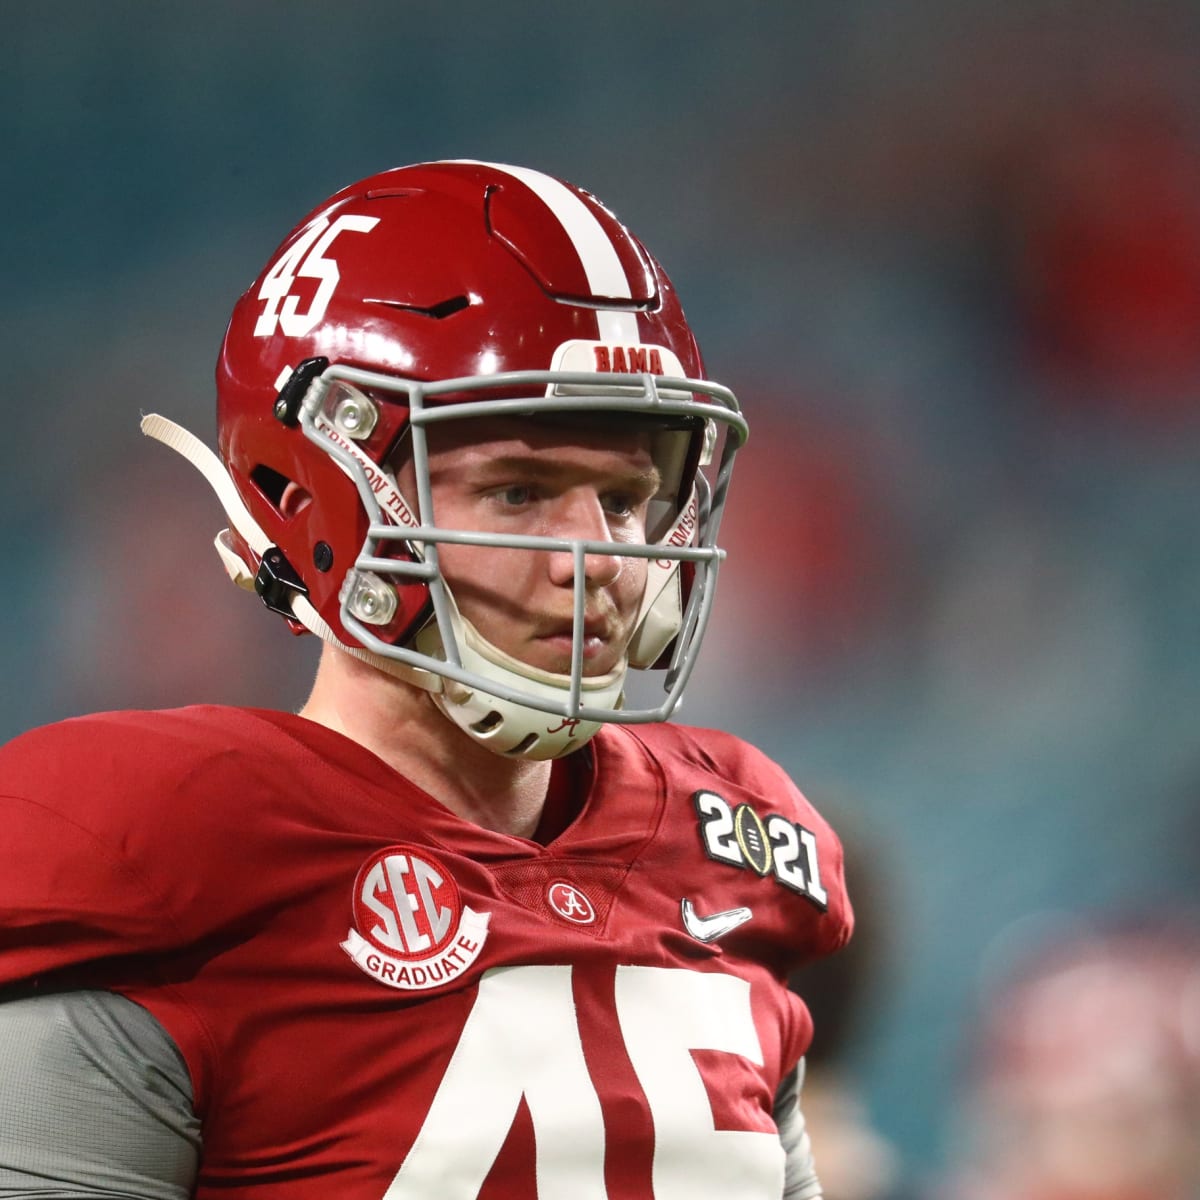 Panthers select Thomas Fletcher at No. 222 overall in 2021 NFL Draft